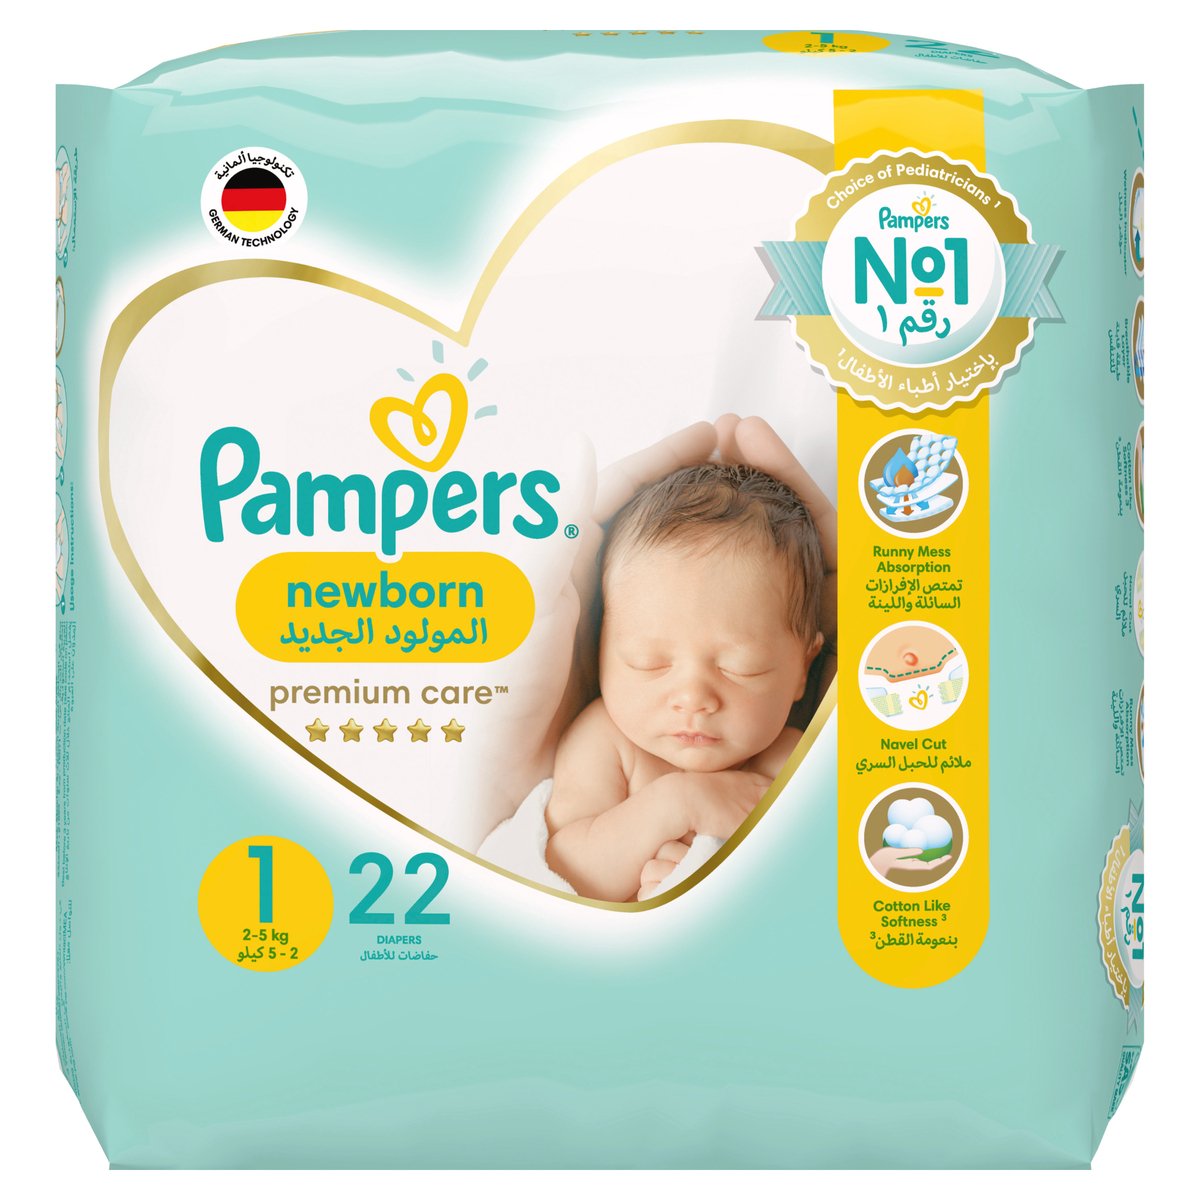 Pampers Premium Care Newborn Taped Diapers, Size 1, 2-5kg, Unique Softest Absorption for Ultimate Skin Protection, 22 pcs